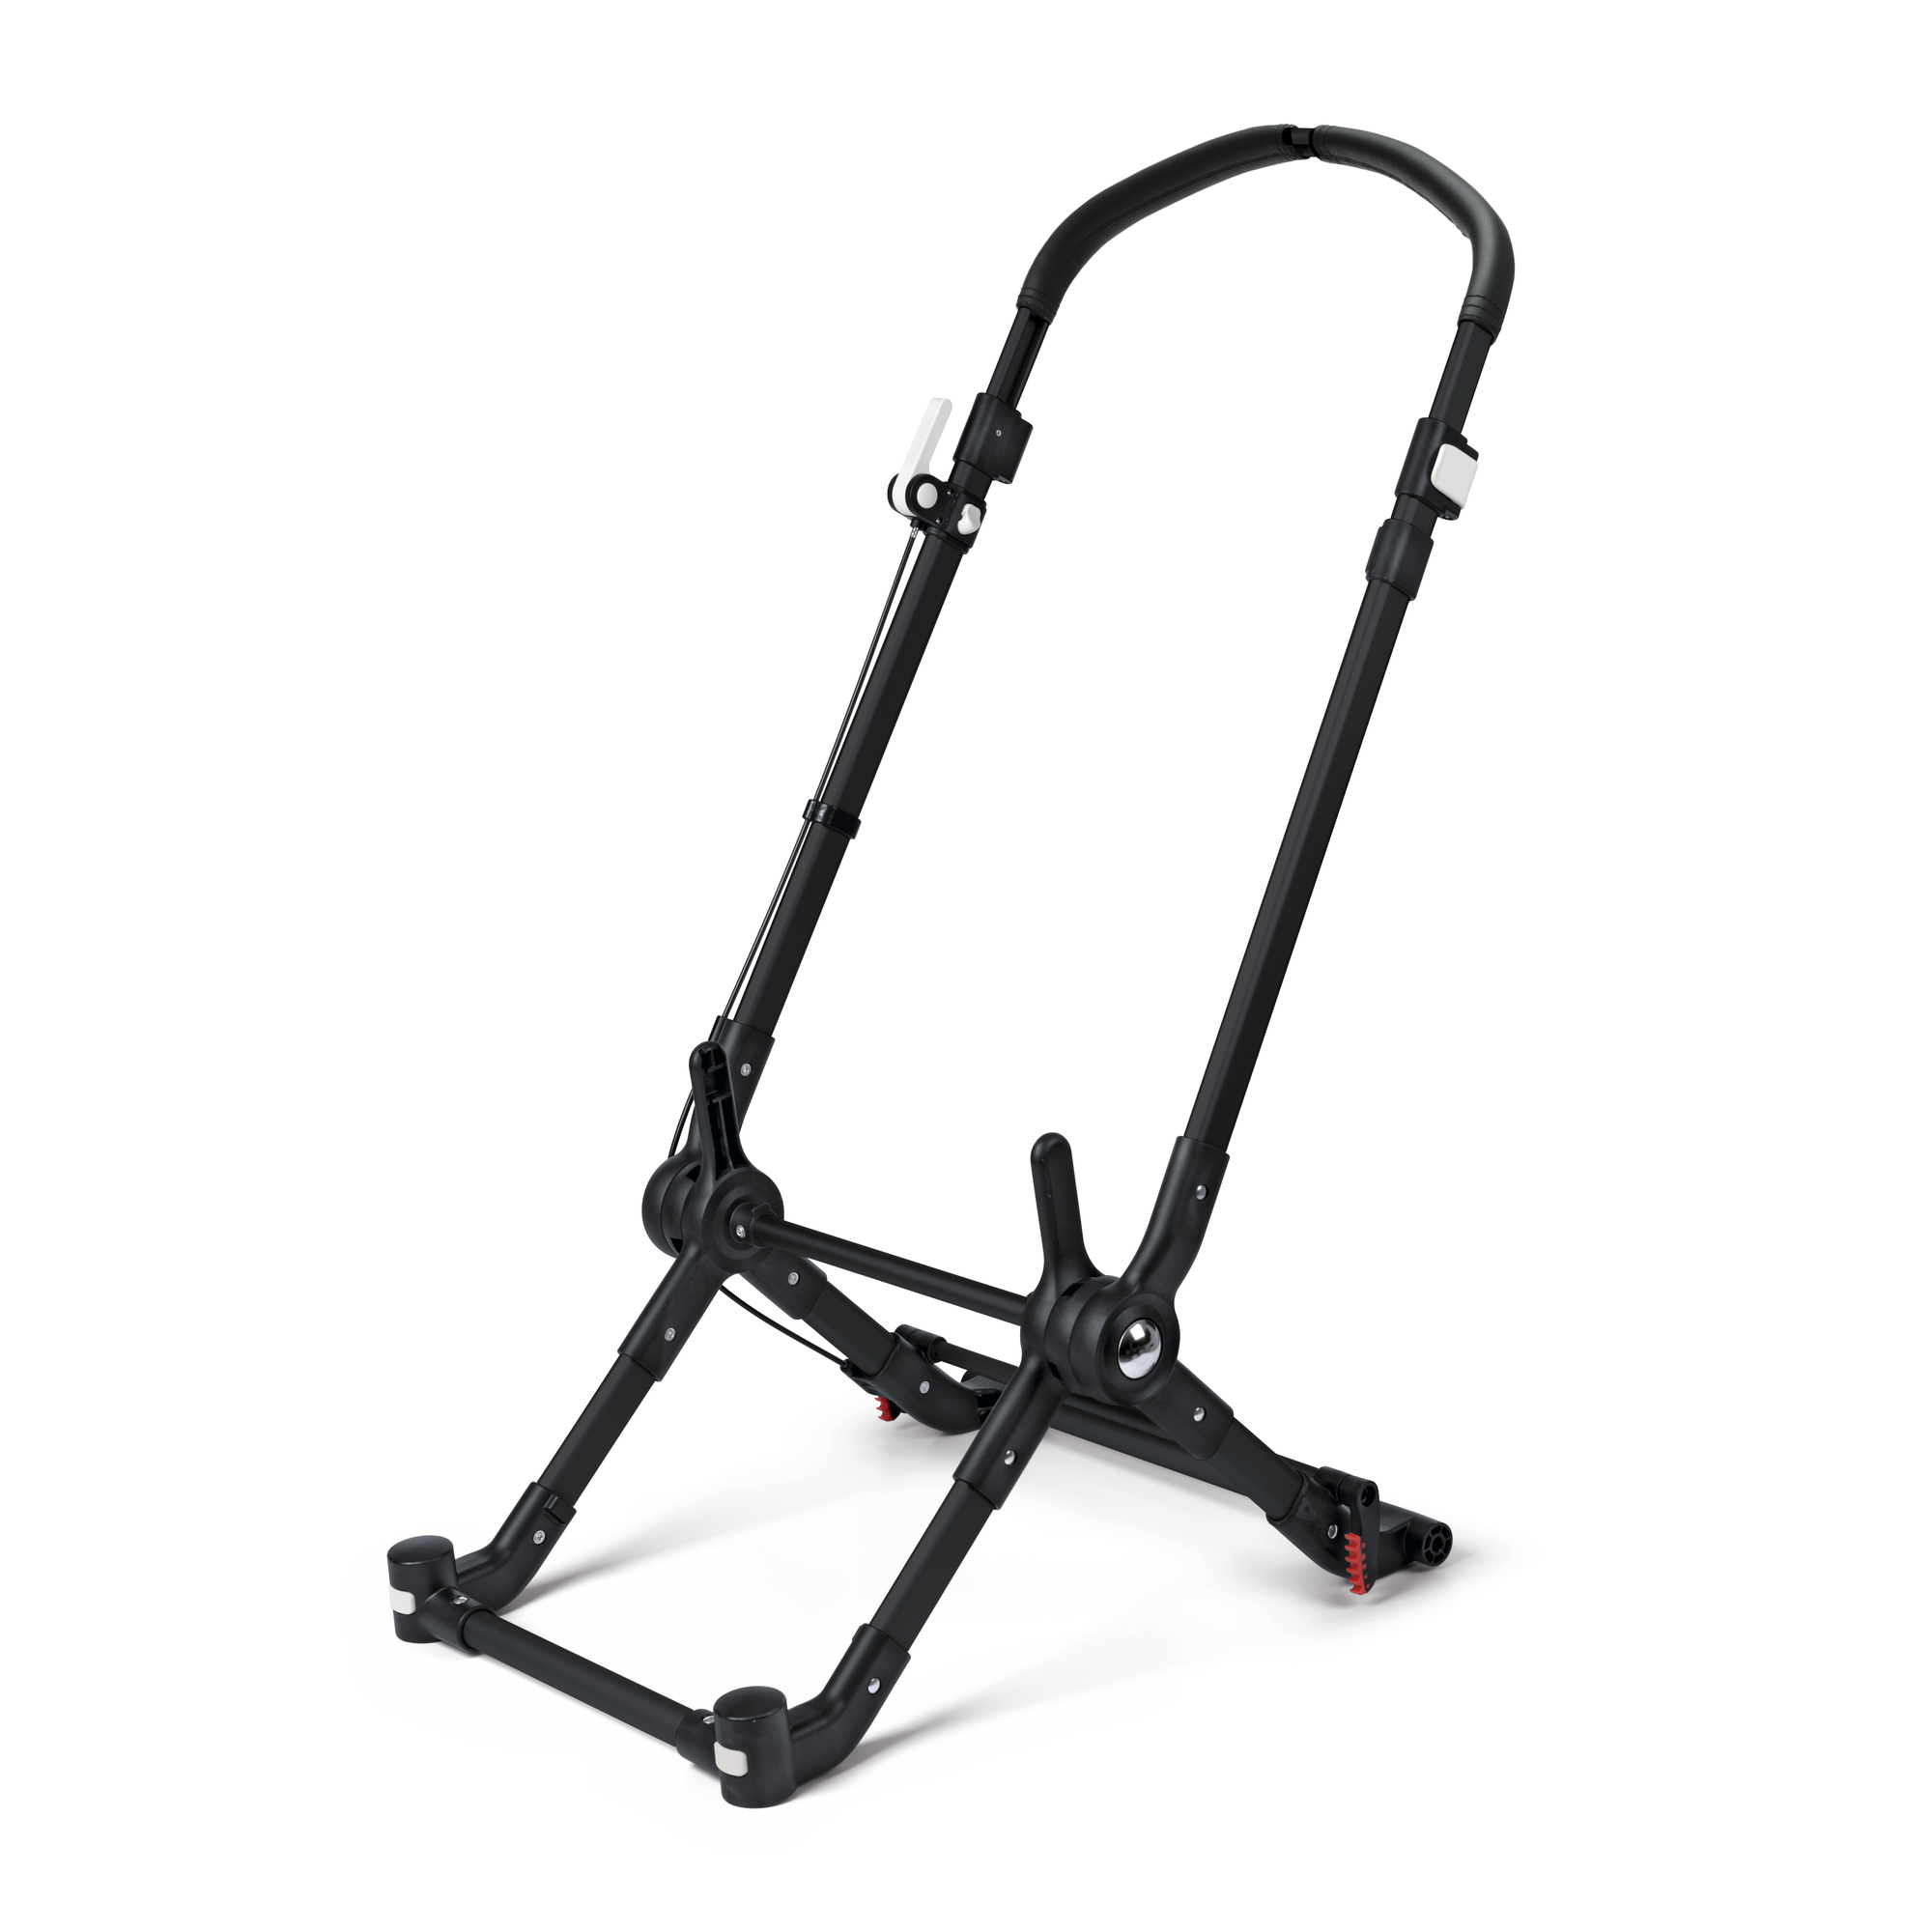 bugaboo cameleon 2 chassis